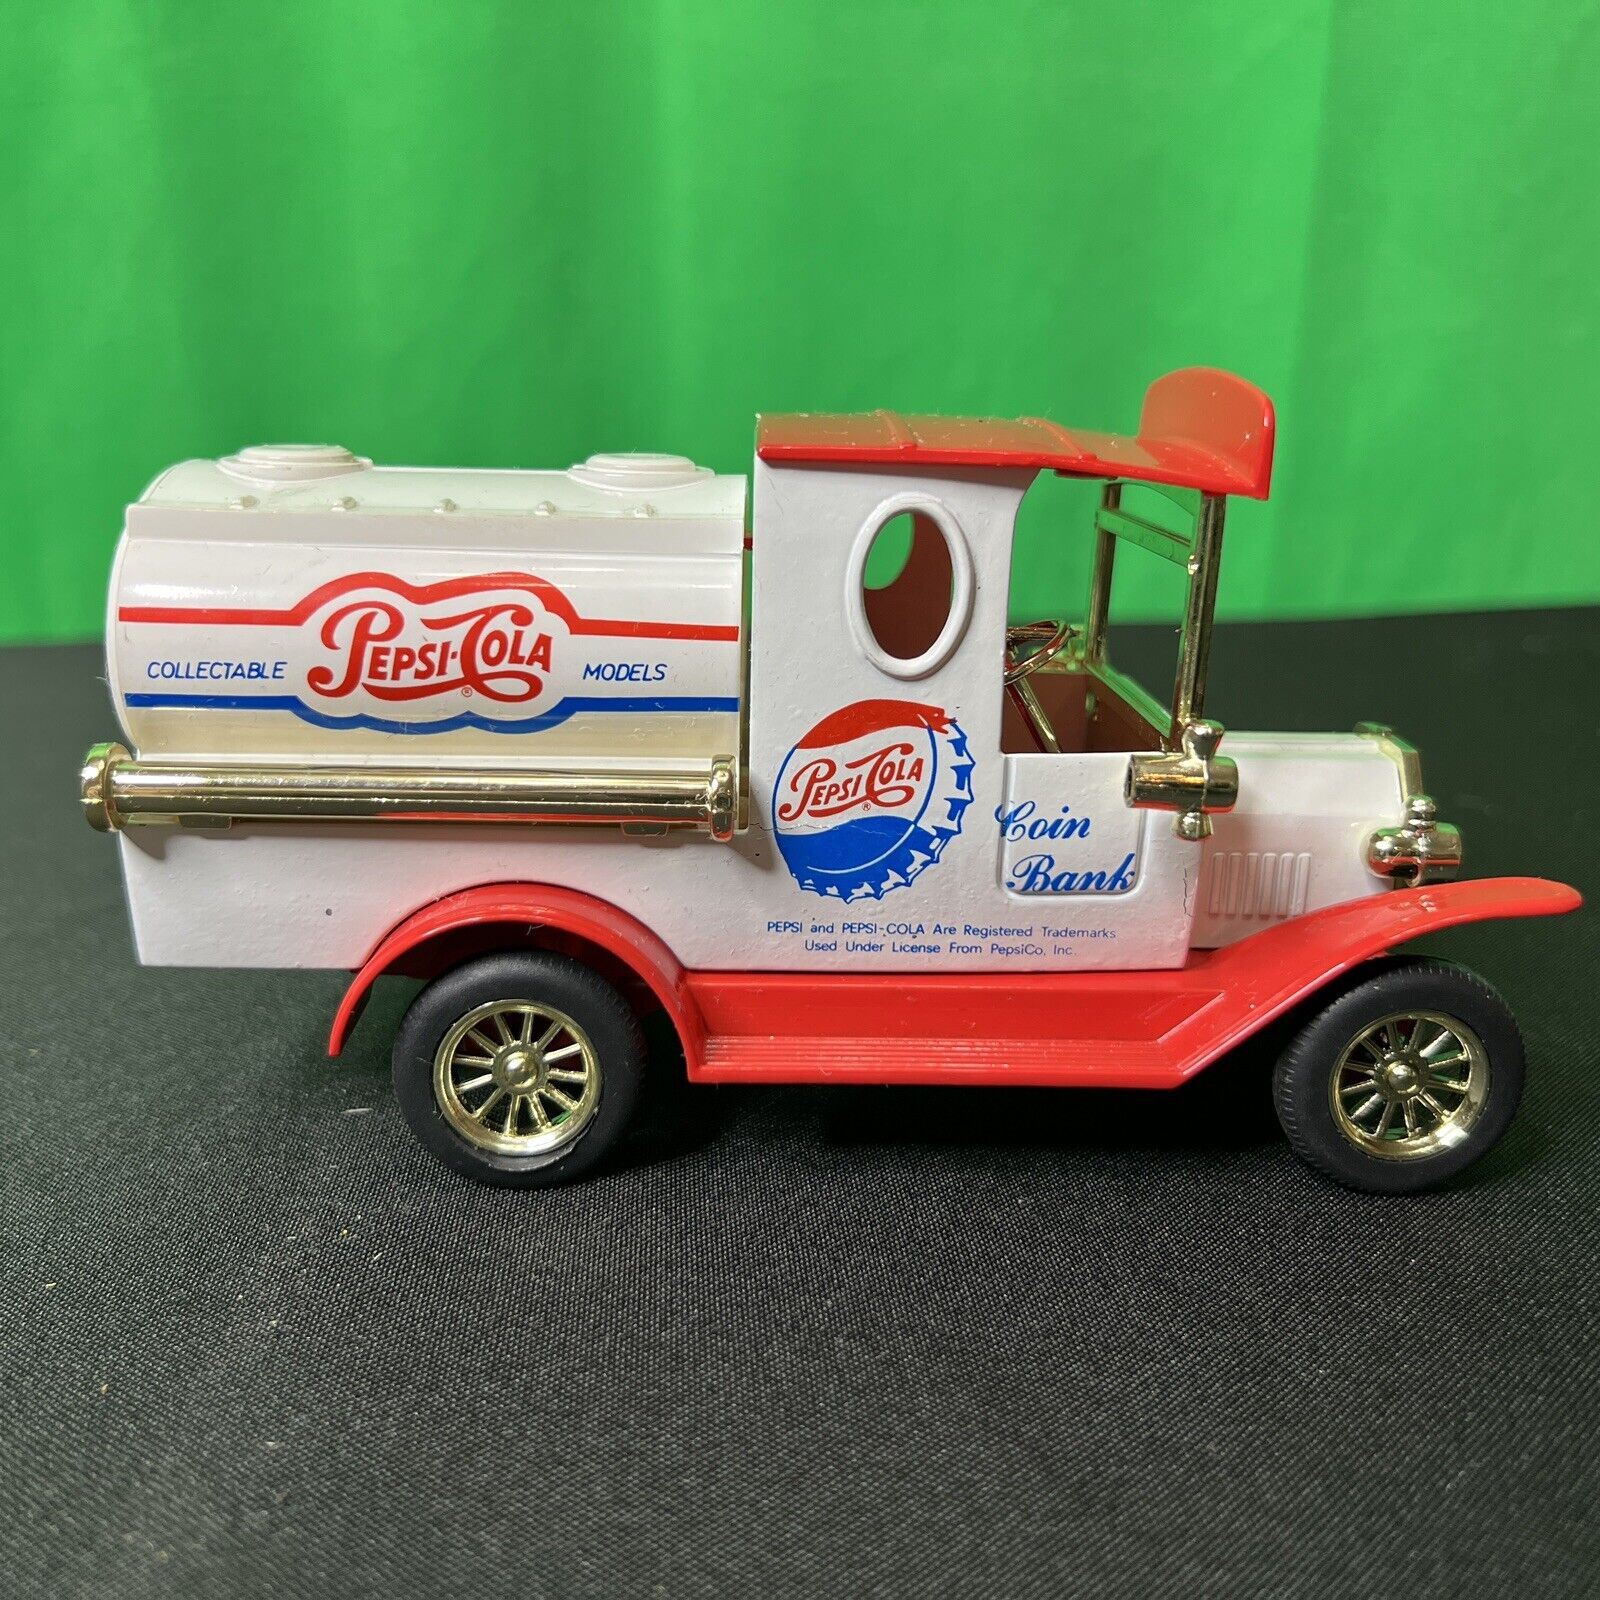 GOLDEN CLASSIC PEPSI COLA DIECAST COIN BANK - Red & White & Blue